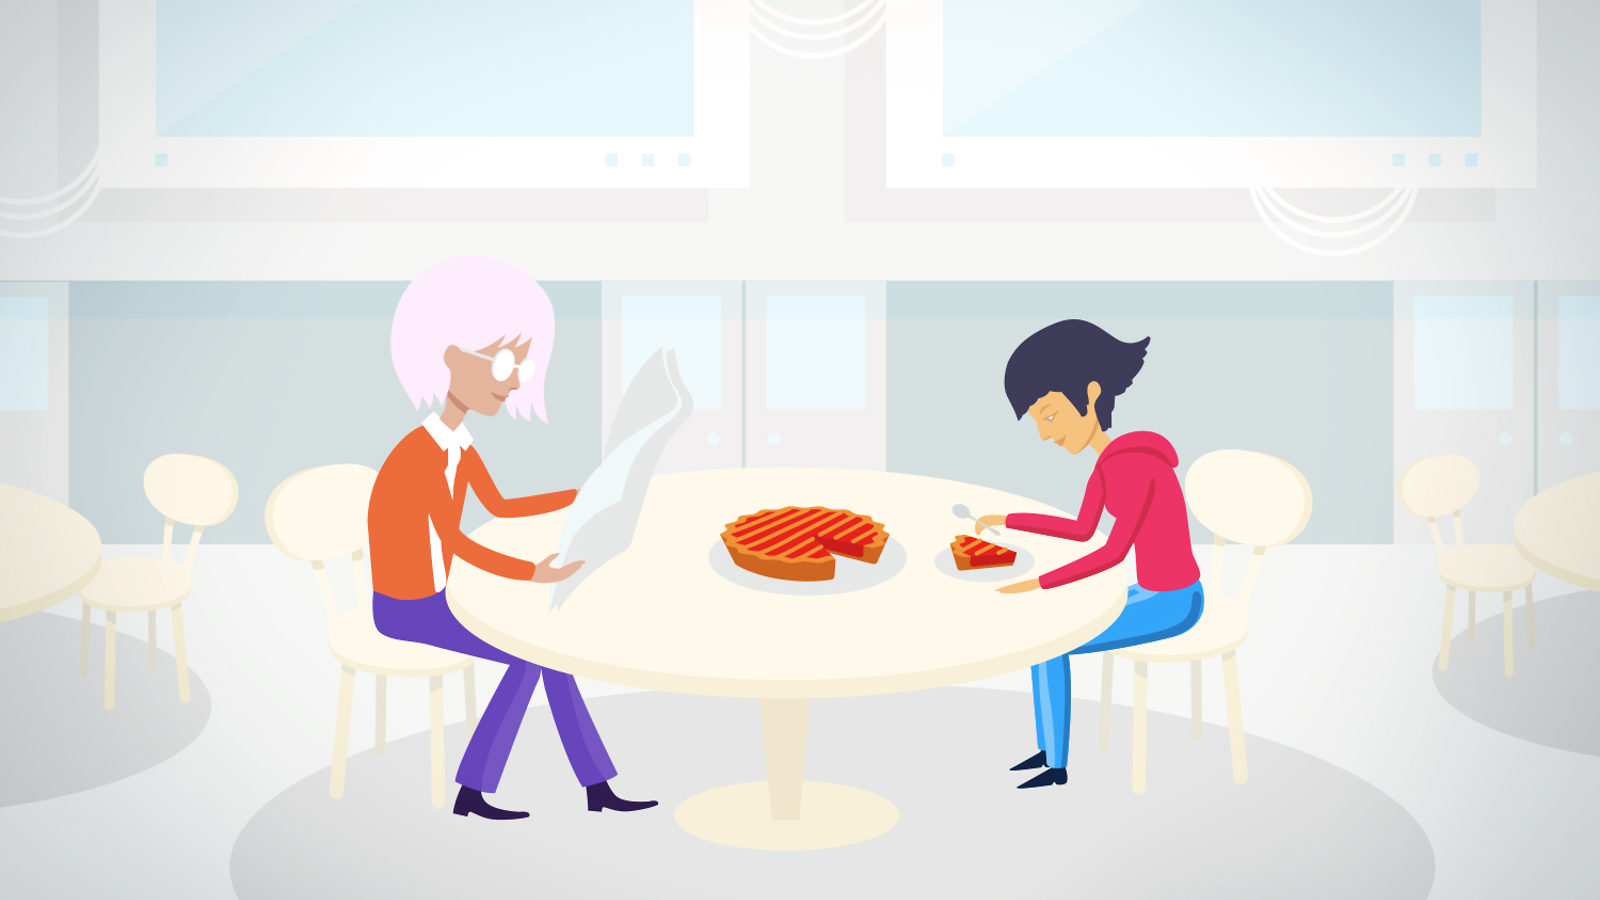 Illustration of two people sitting at table cherry pie: deconstruction